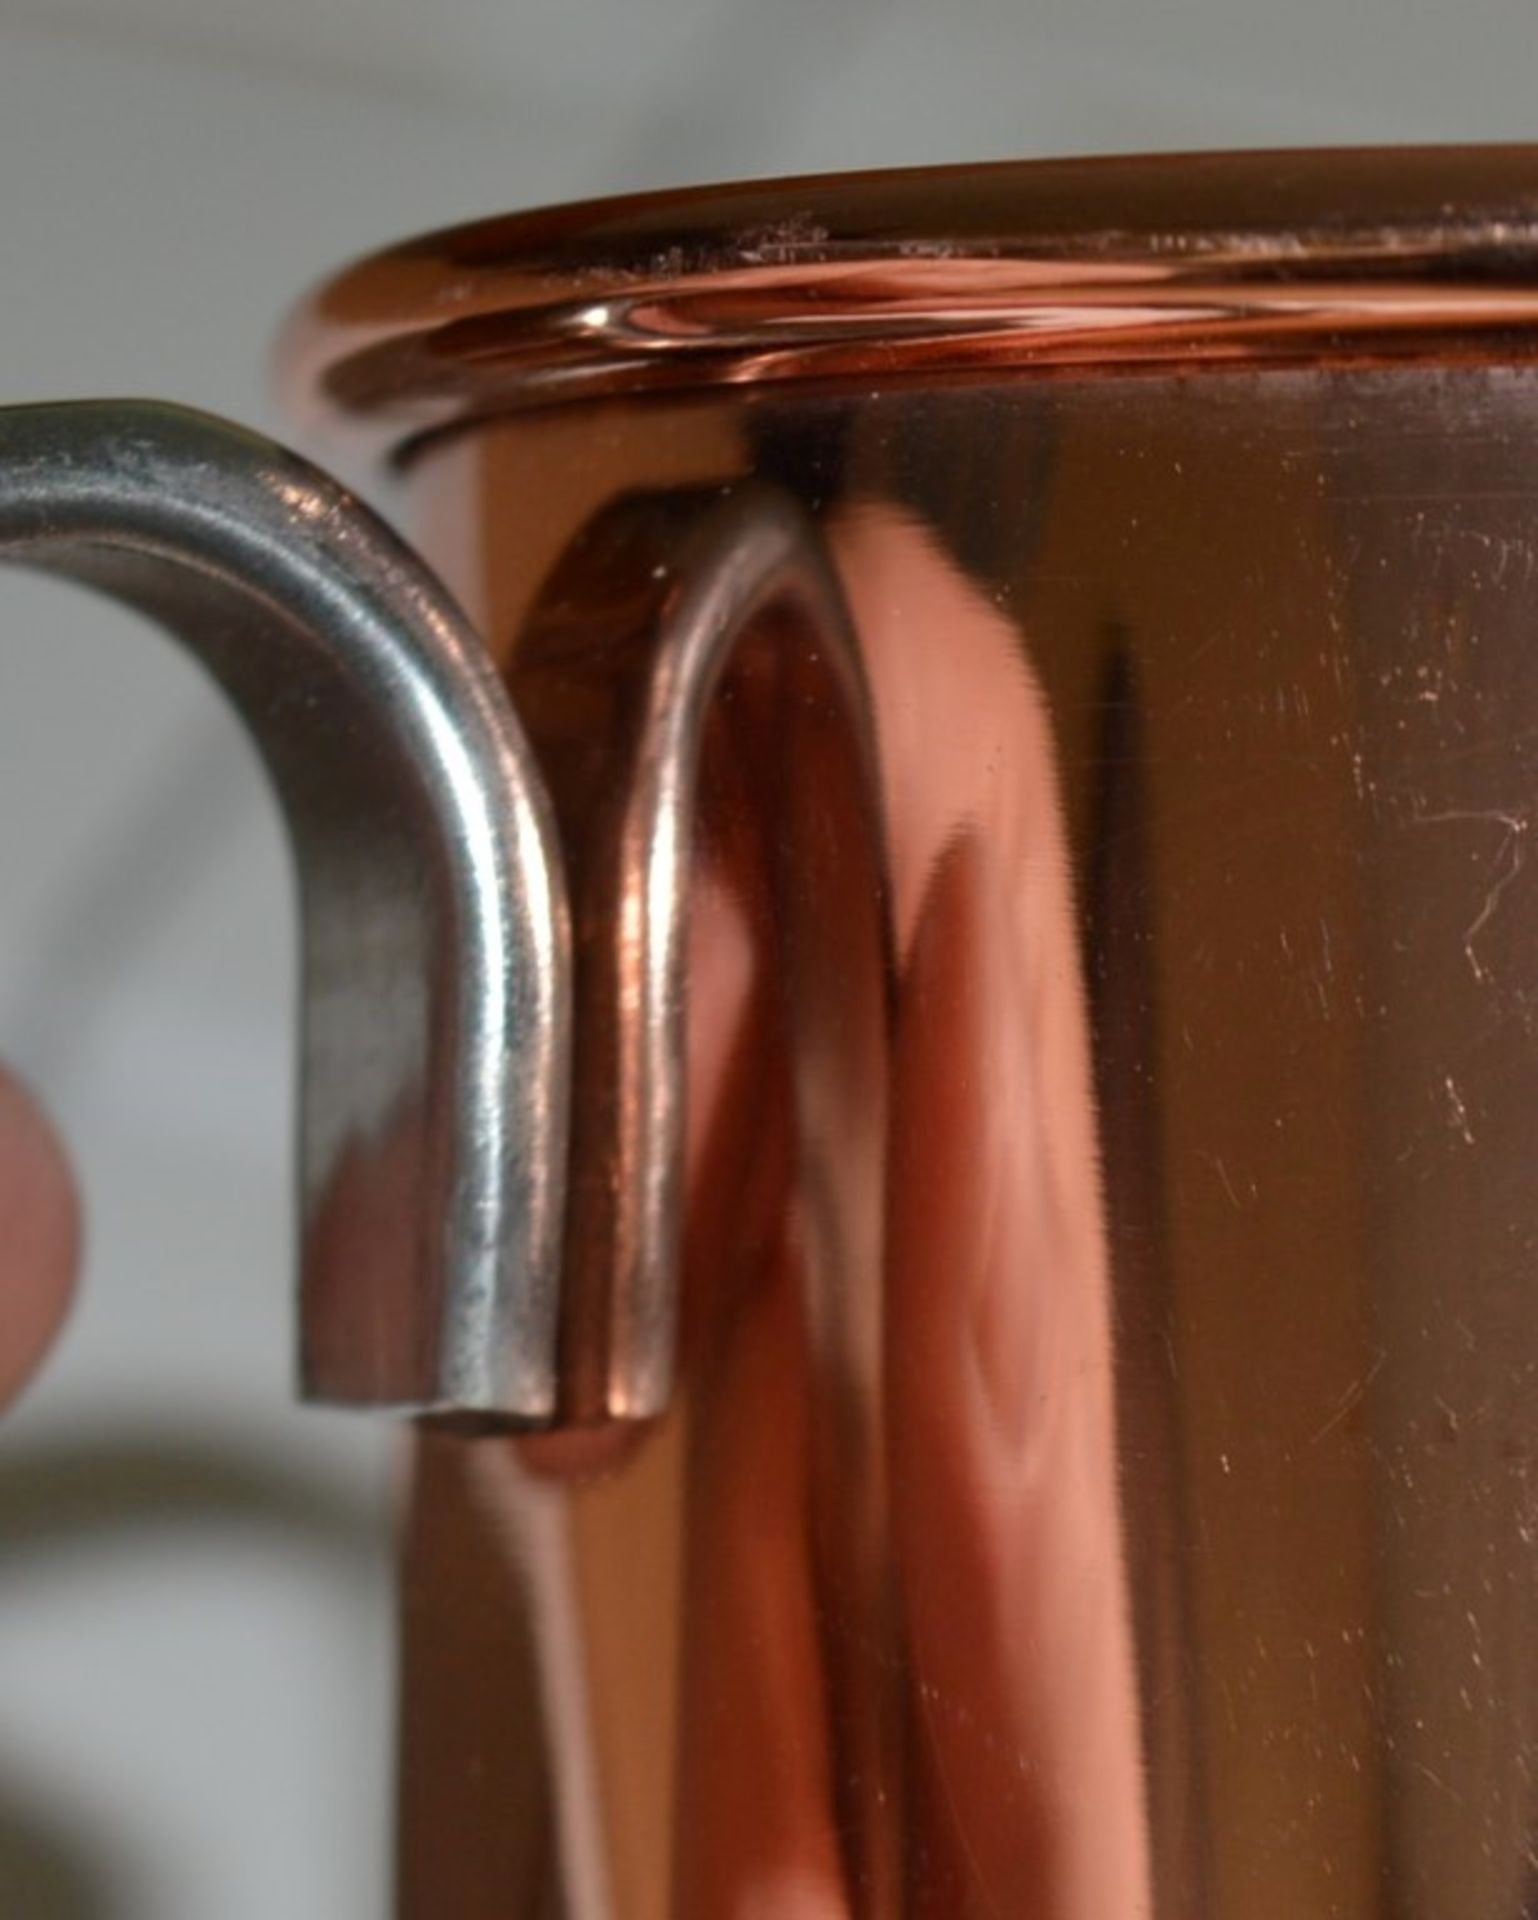 48 x Russian Standard Vodka Copper Mugs - Officially Used to Server Moscow Mule - Copper on the - Image 2 of 3